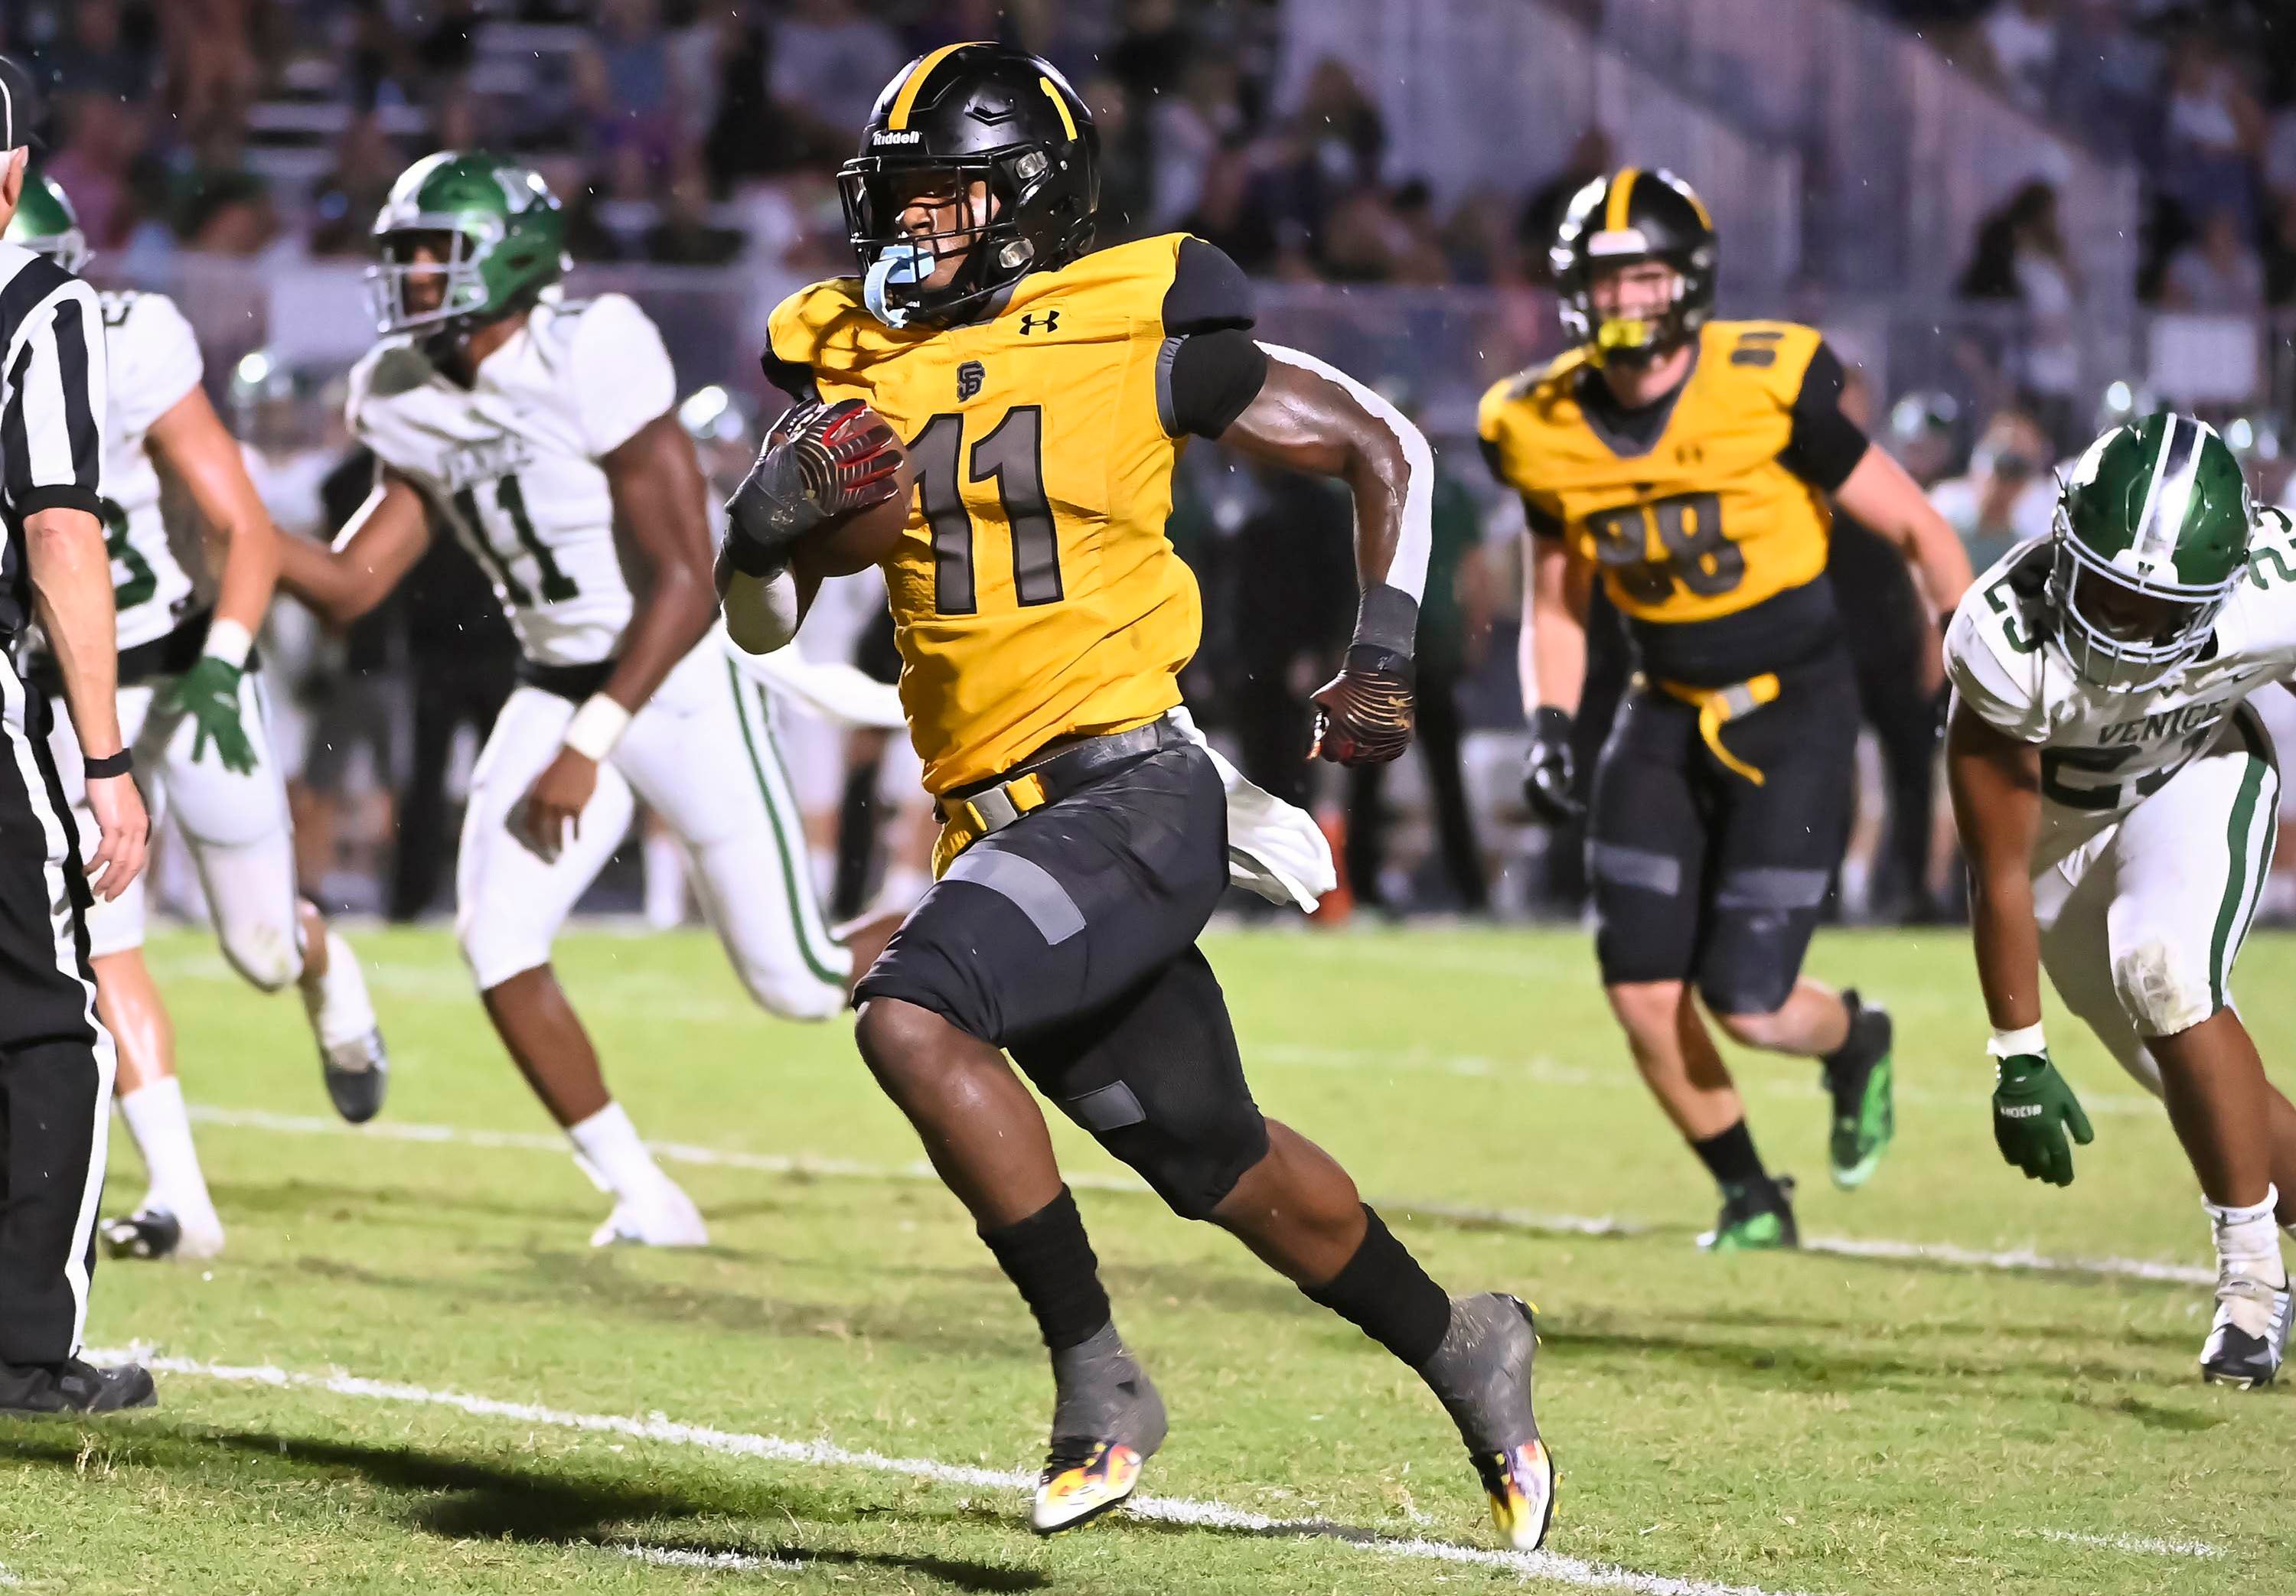 Durell Robinson and No. 3 St. Frances Academy head on the road to face No. 25 Dutch Fork Friday on FloFootball.